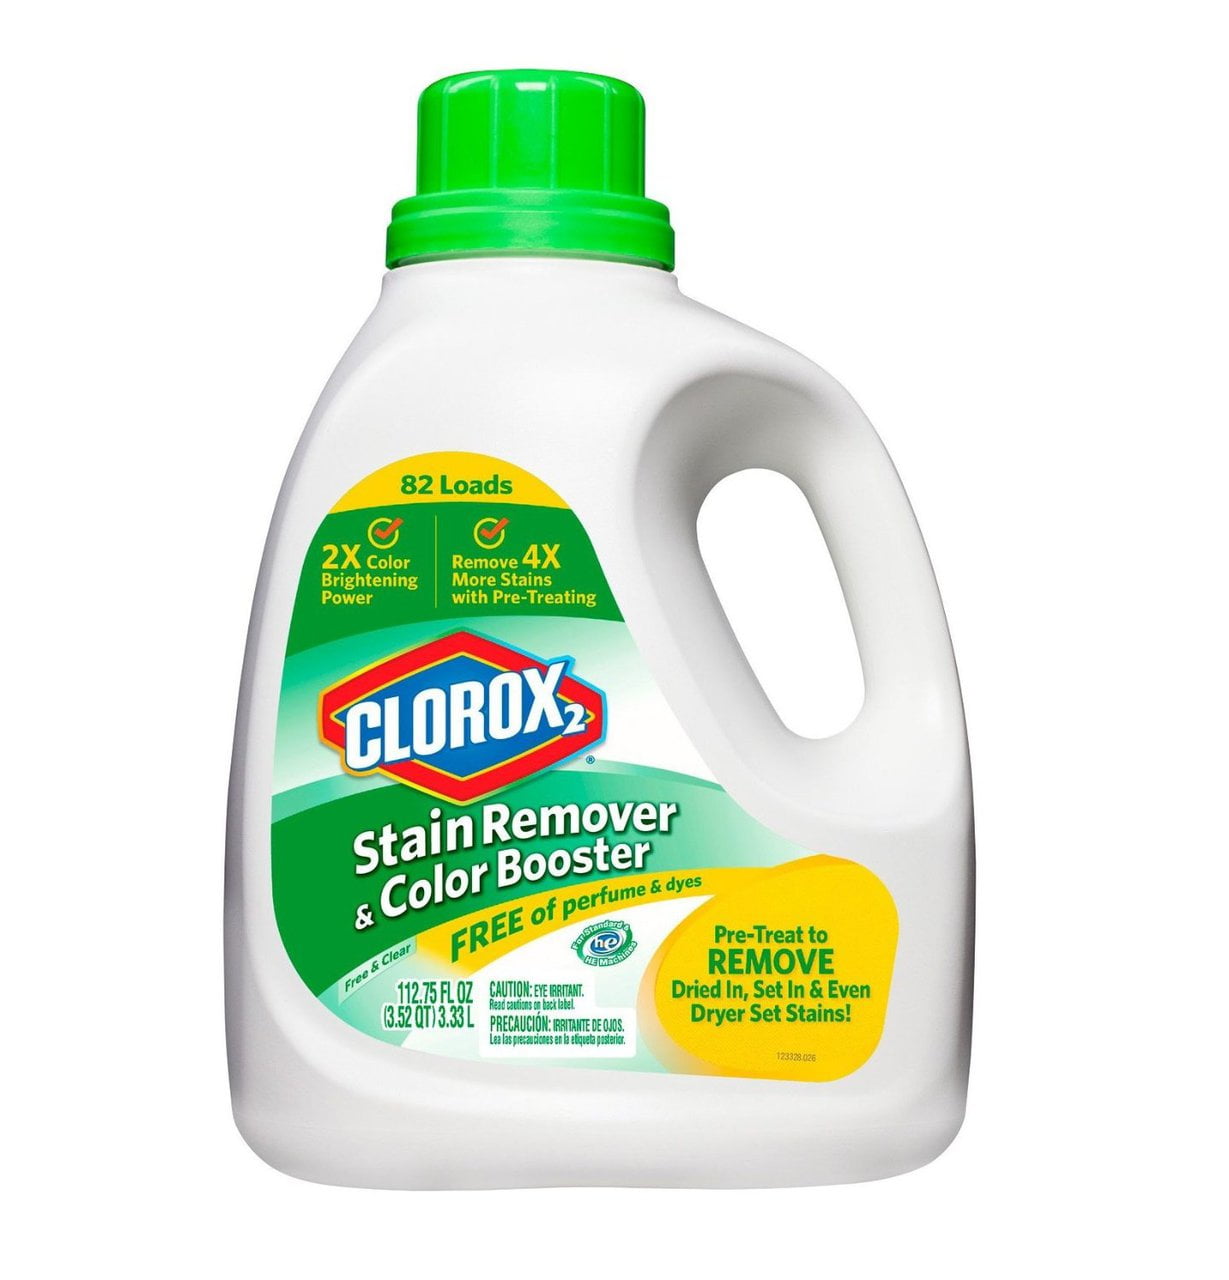 Clorox 2 For Colors - Free & Clear Stain Remover And Color